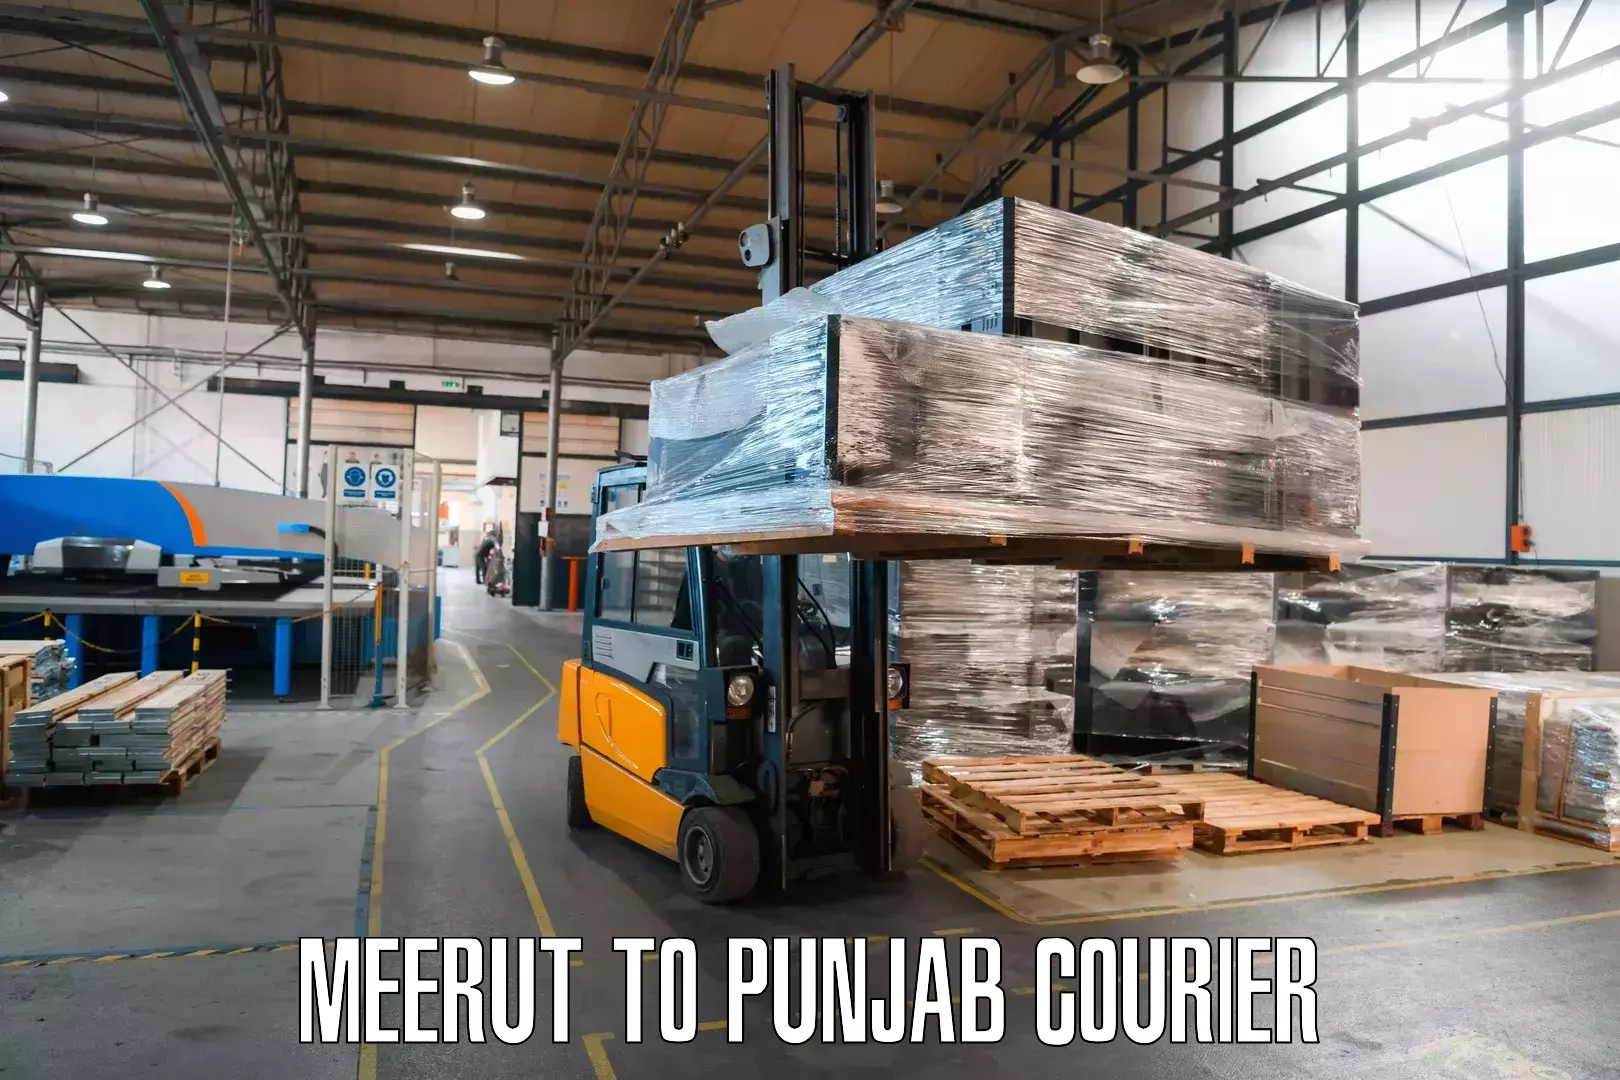 Next-generation courier services Meerut to Goindwal Sahib